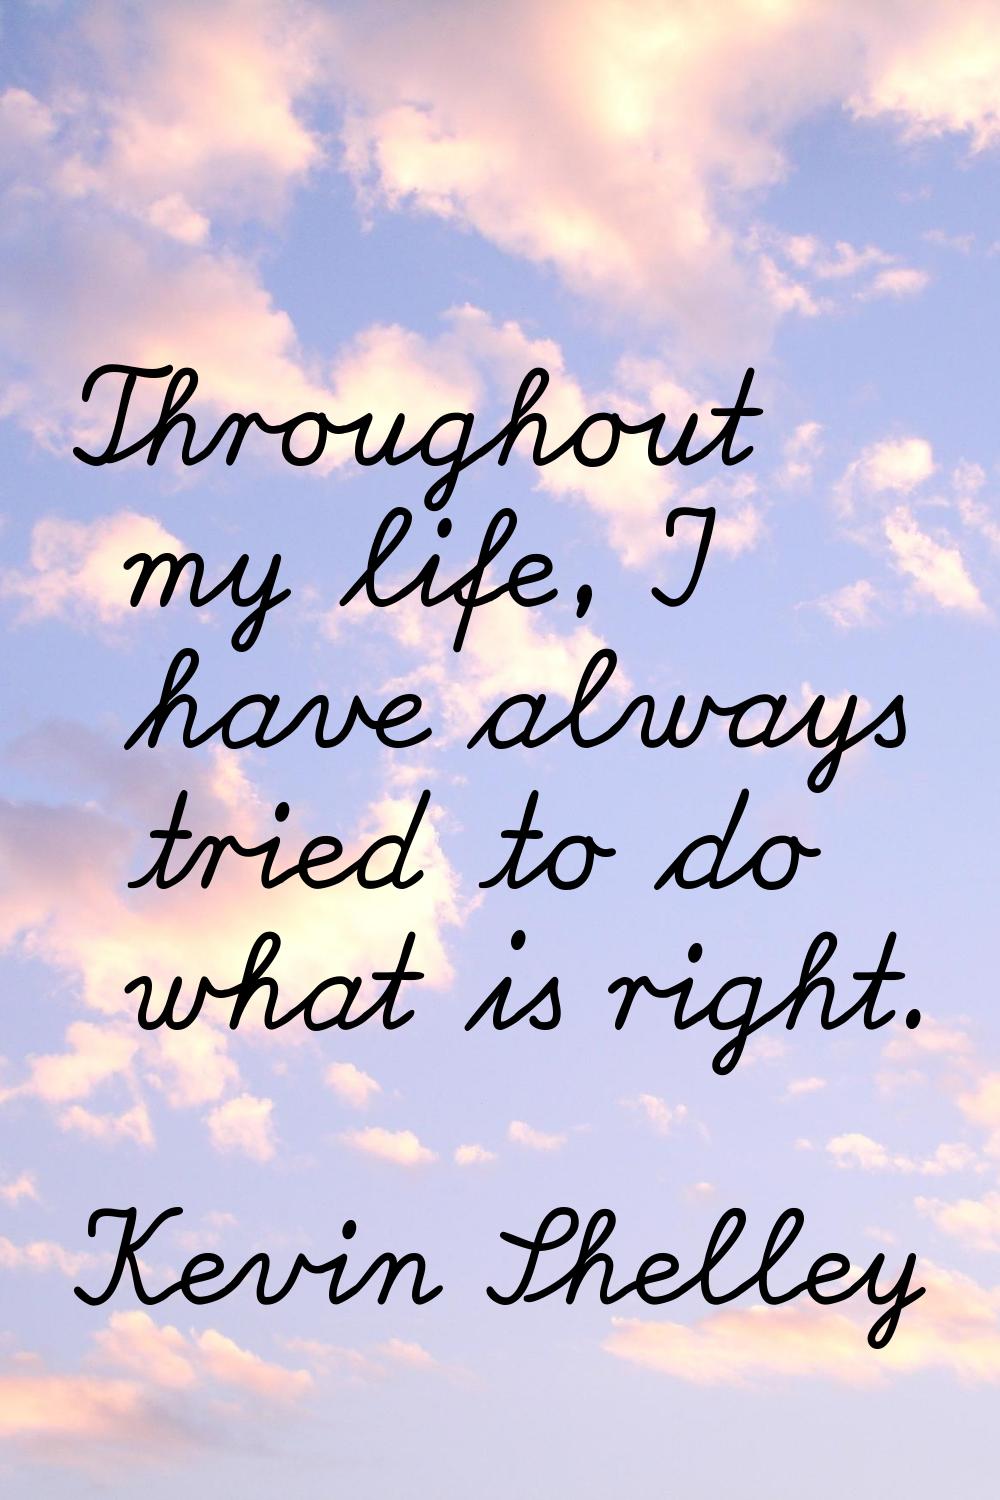 Throughout my life, I have always tried to do what is right.